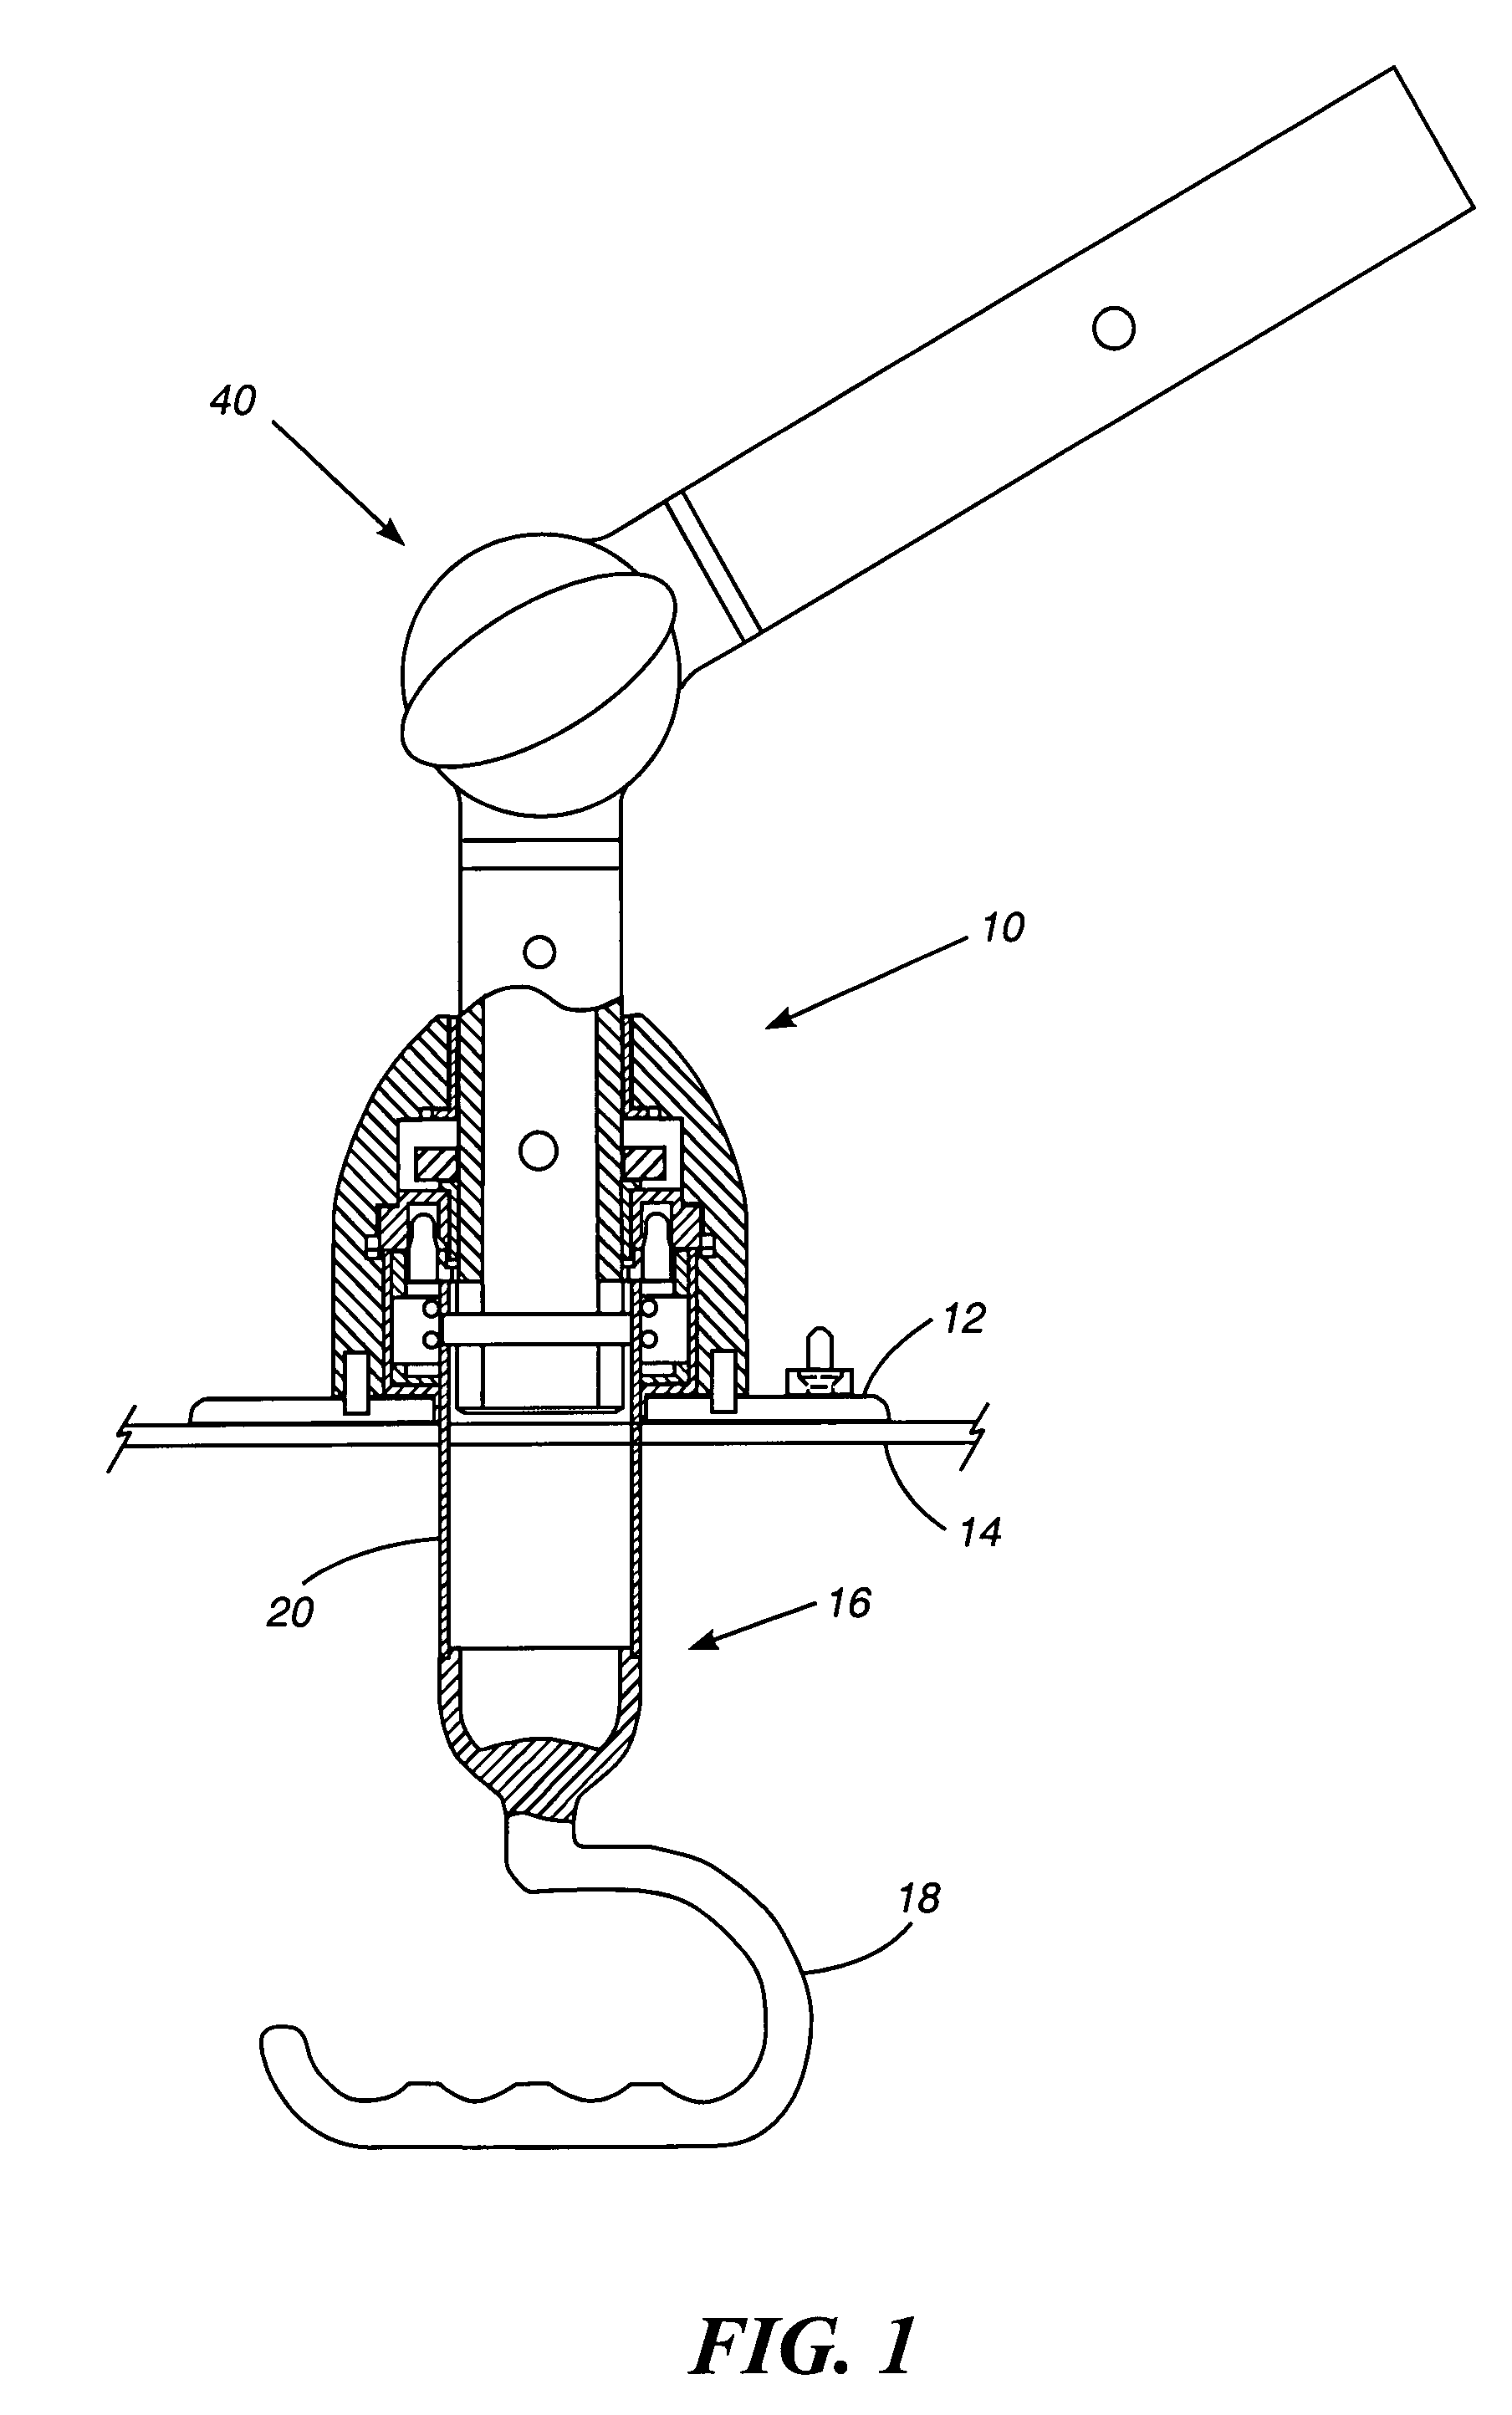 Adjustable outrigger holder for the top of a boat